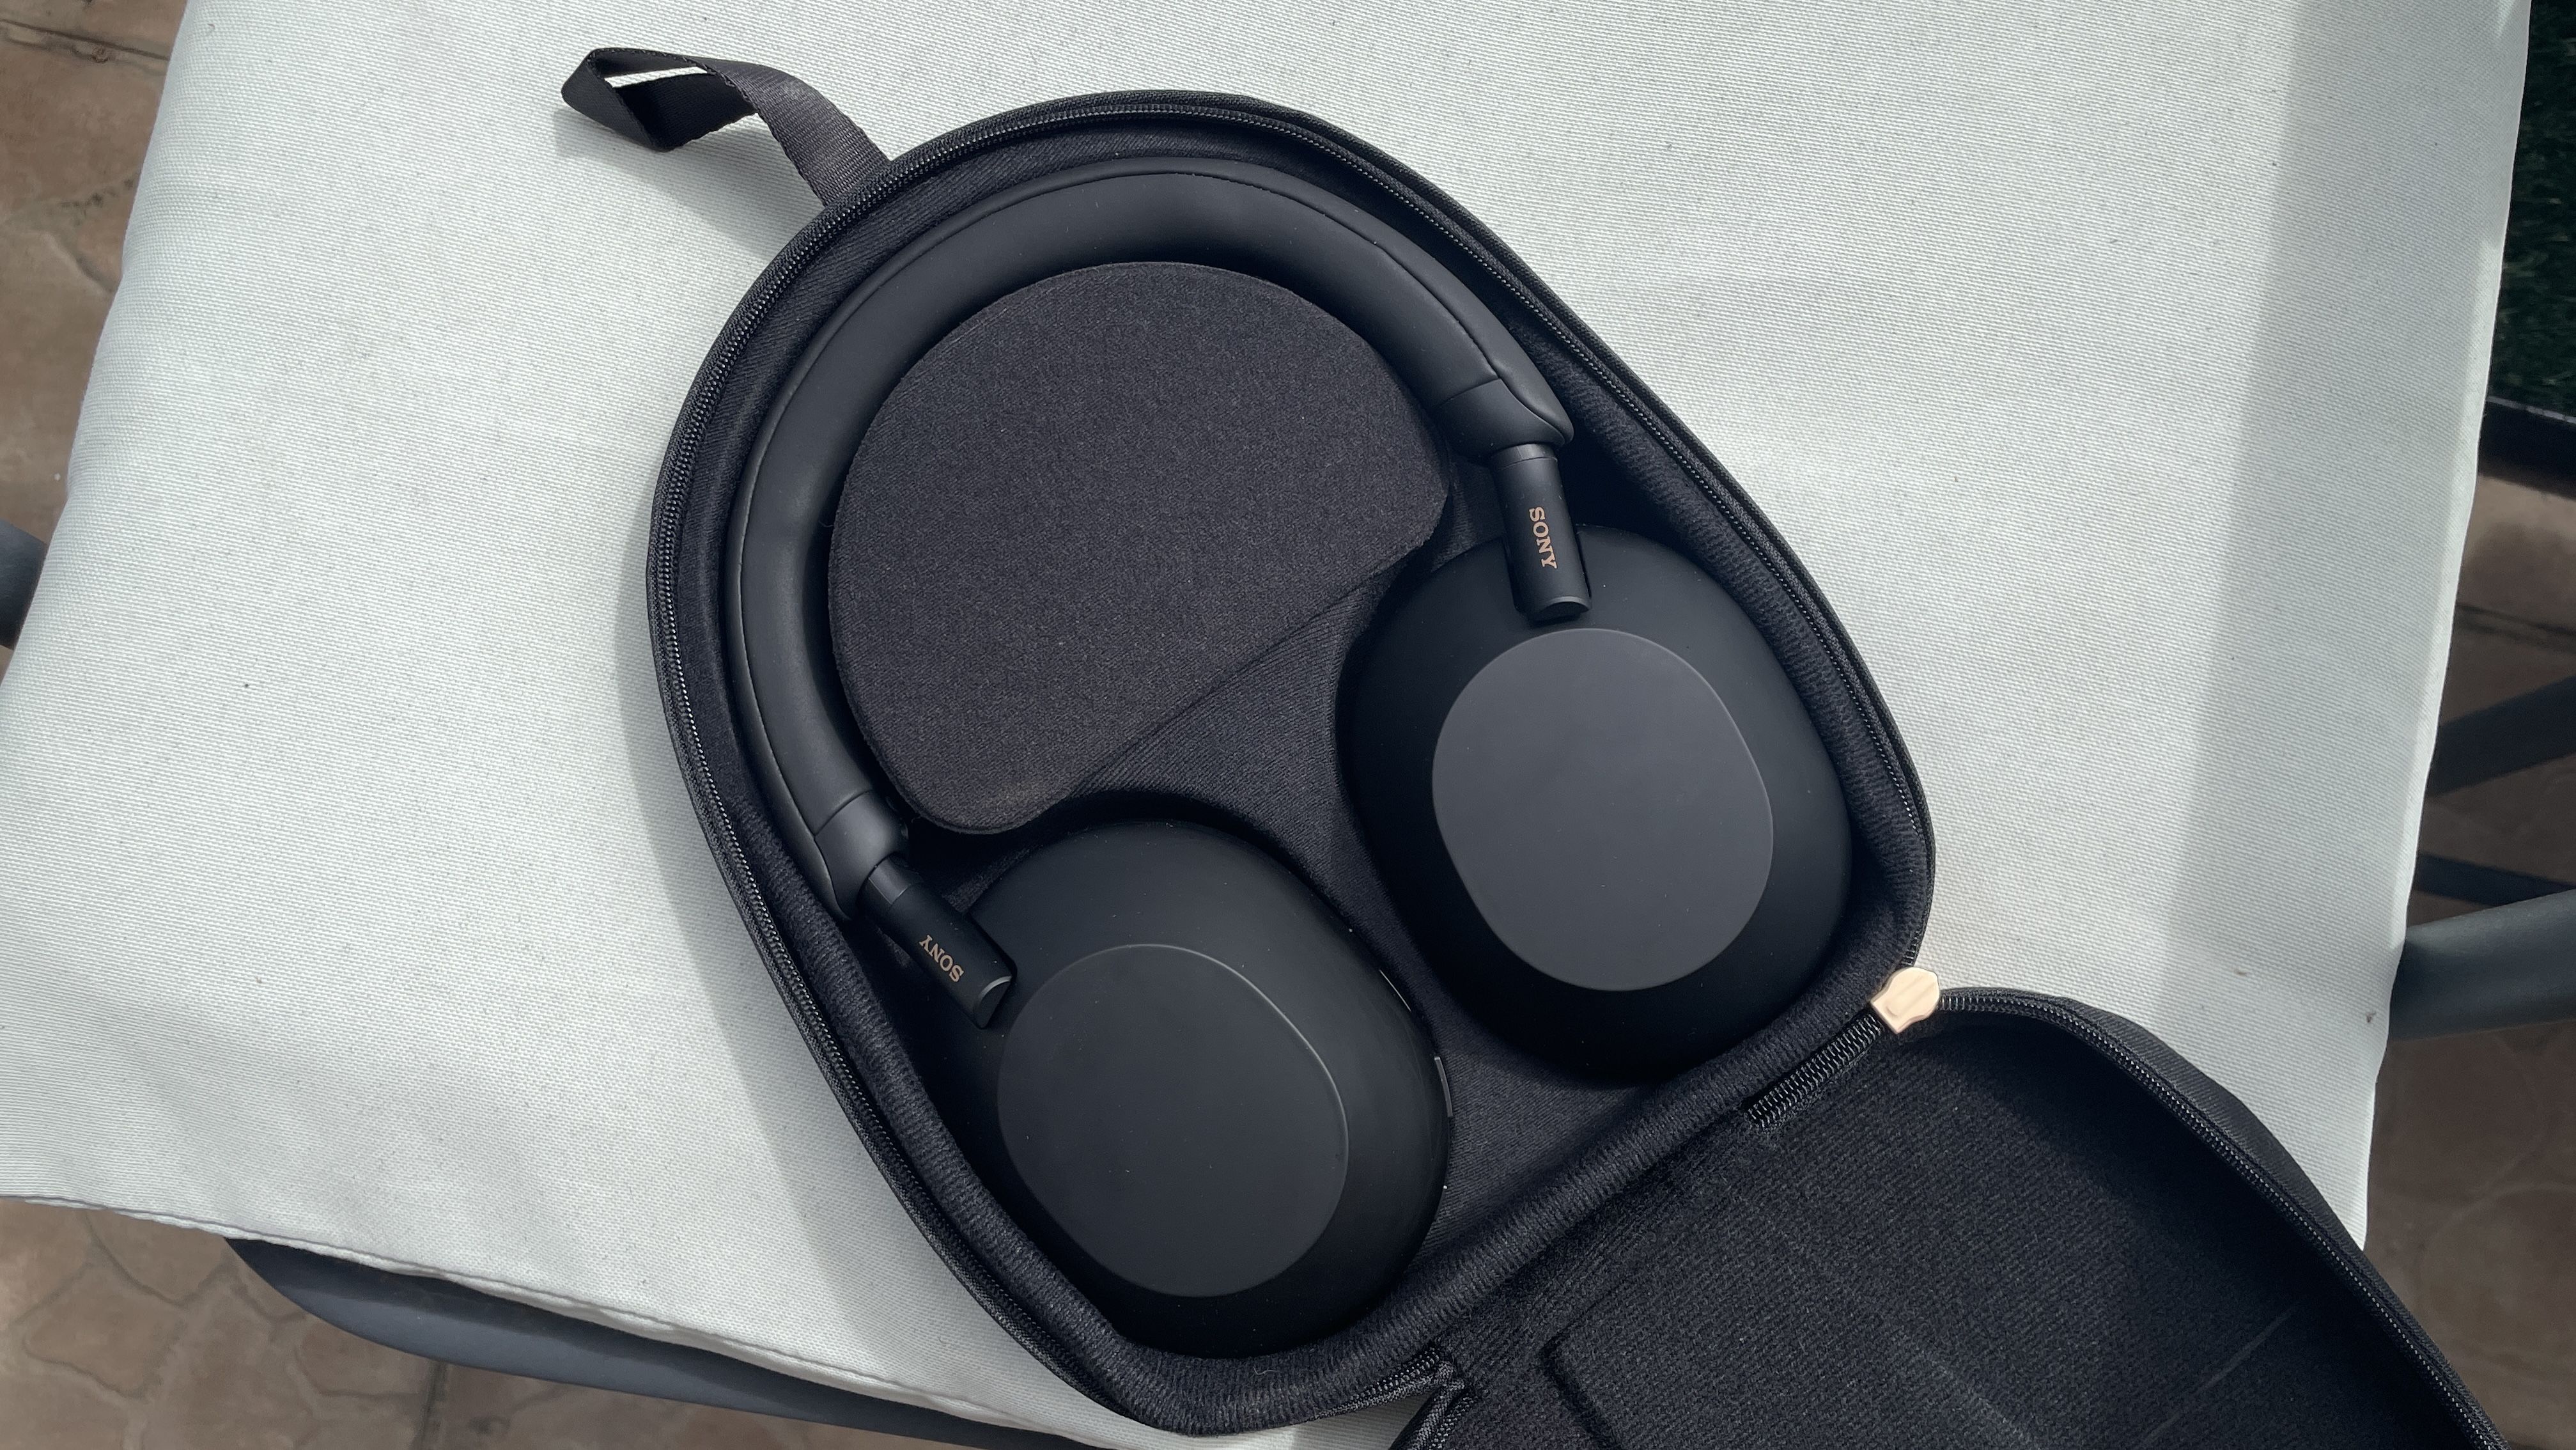 WH-1000XM5: Sony's newest confusingly-named headphones are a real